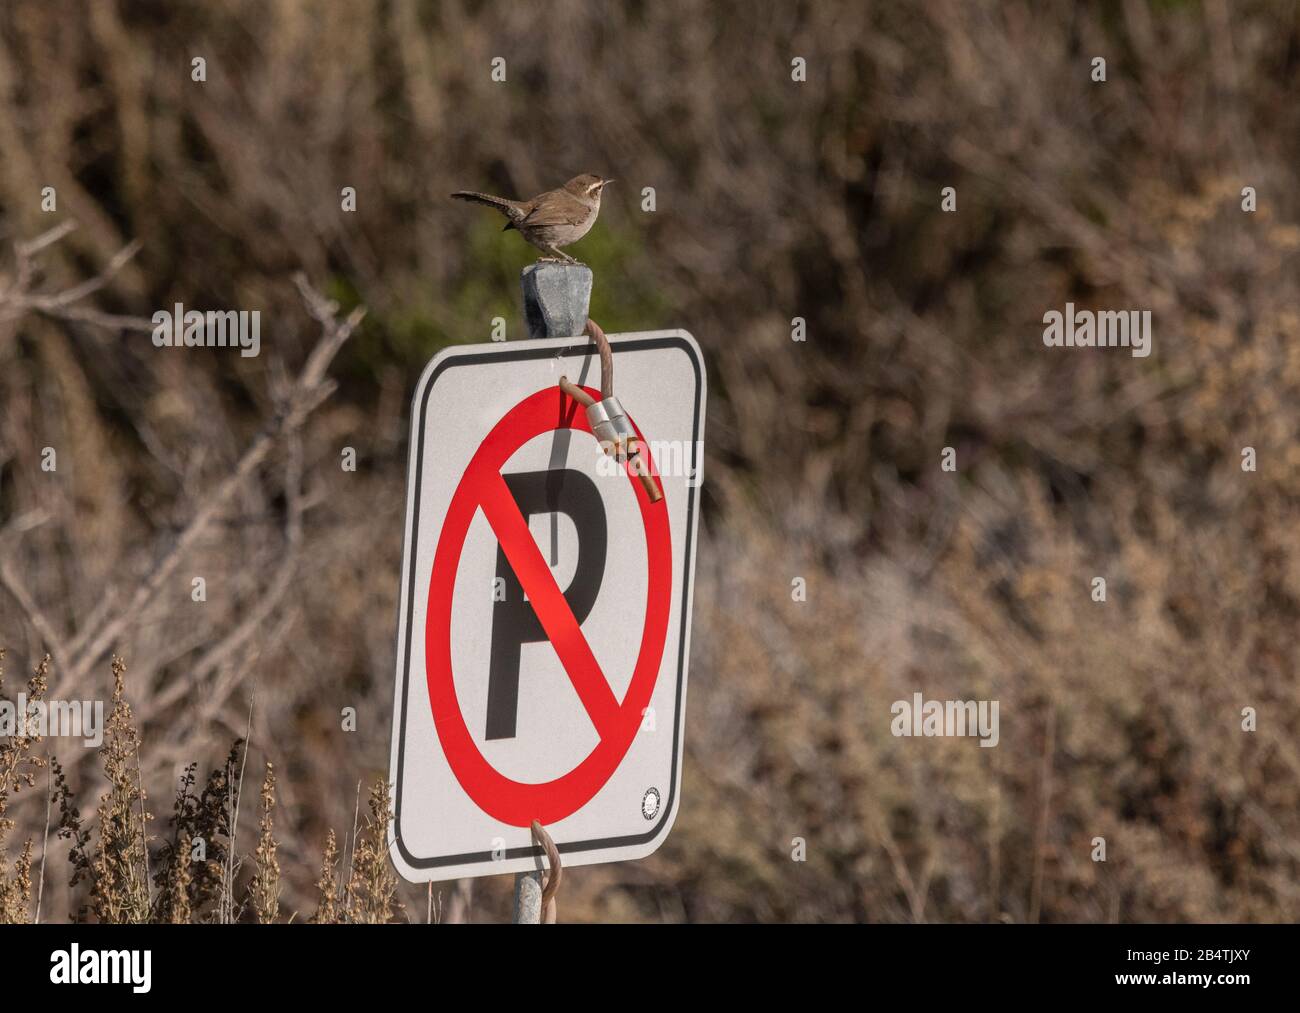 Bewick's wren, Thryomanes bewickii, on No Parking sign at Point lobos state reserve, winter, California. Stock Photo